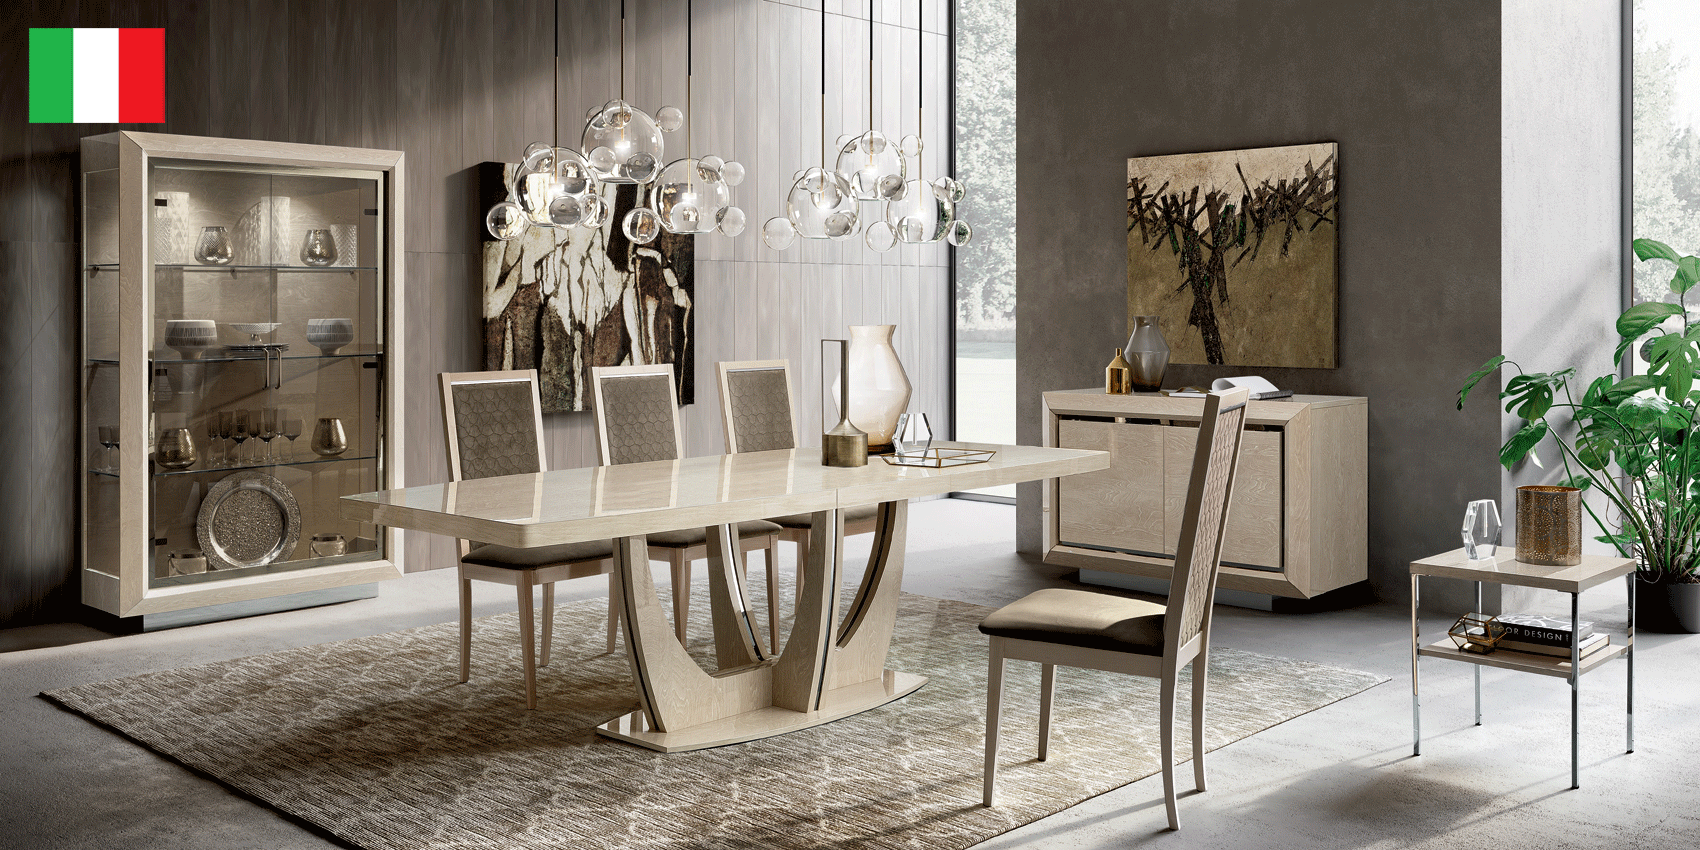 Dining Room Furniture Tables Elite Dining Ivory with Ambra “Rombi” Chairs